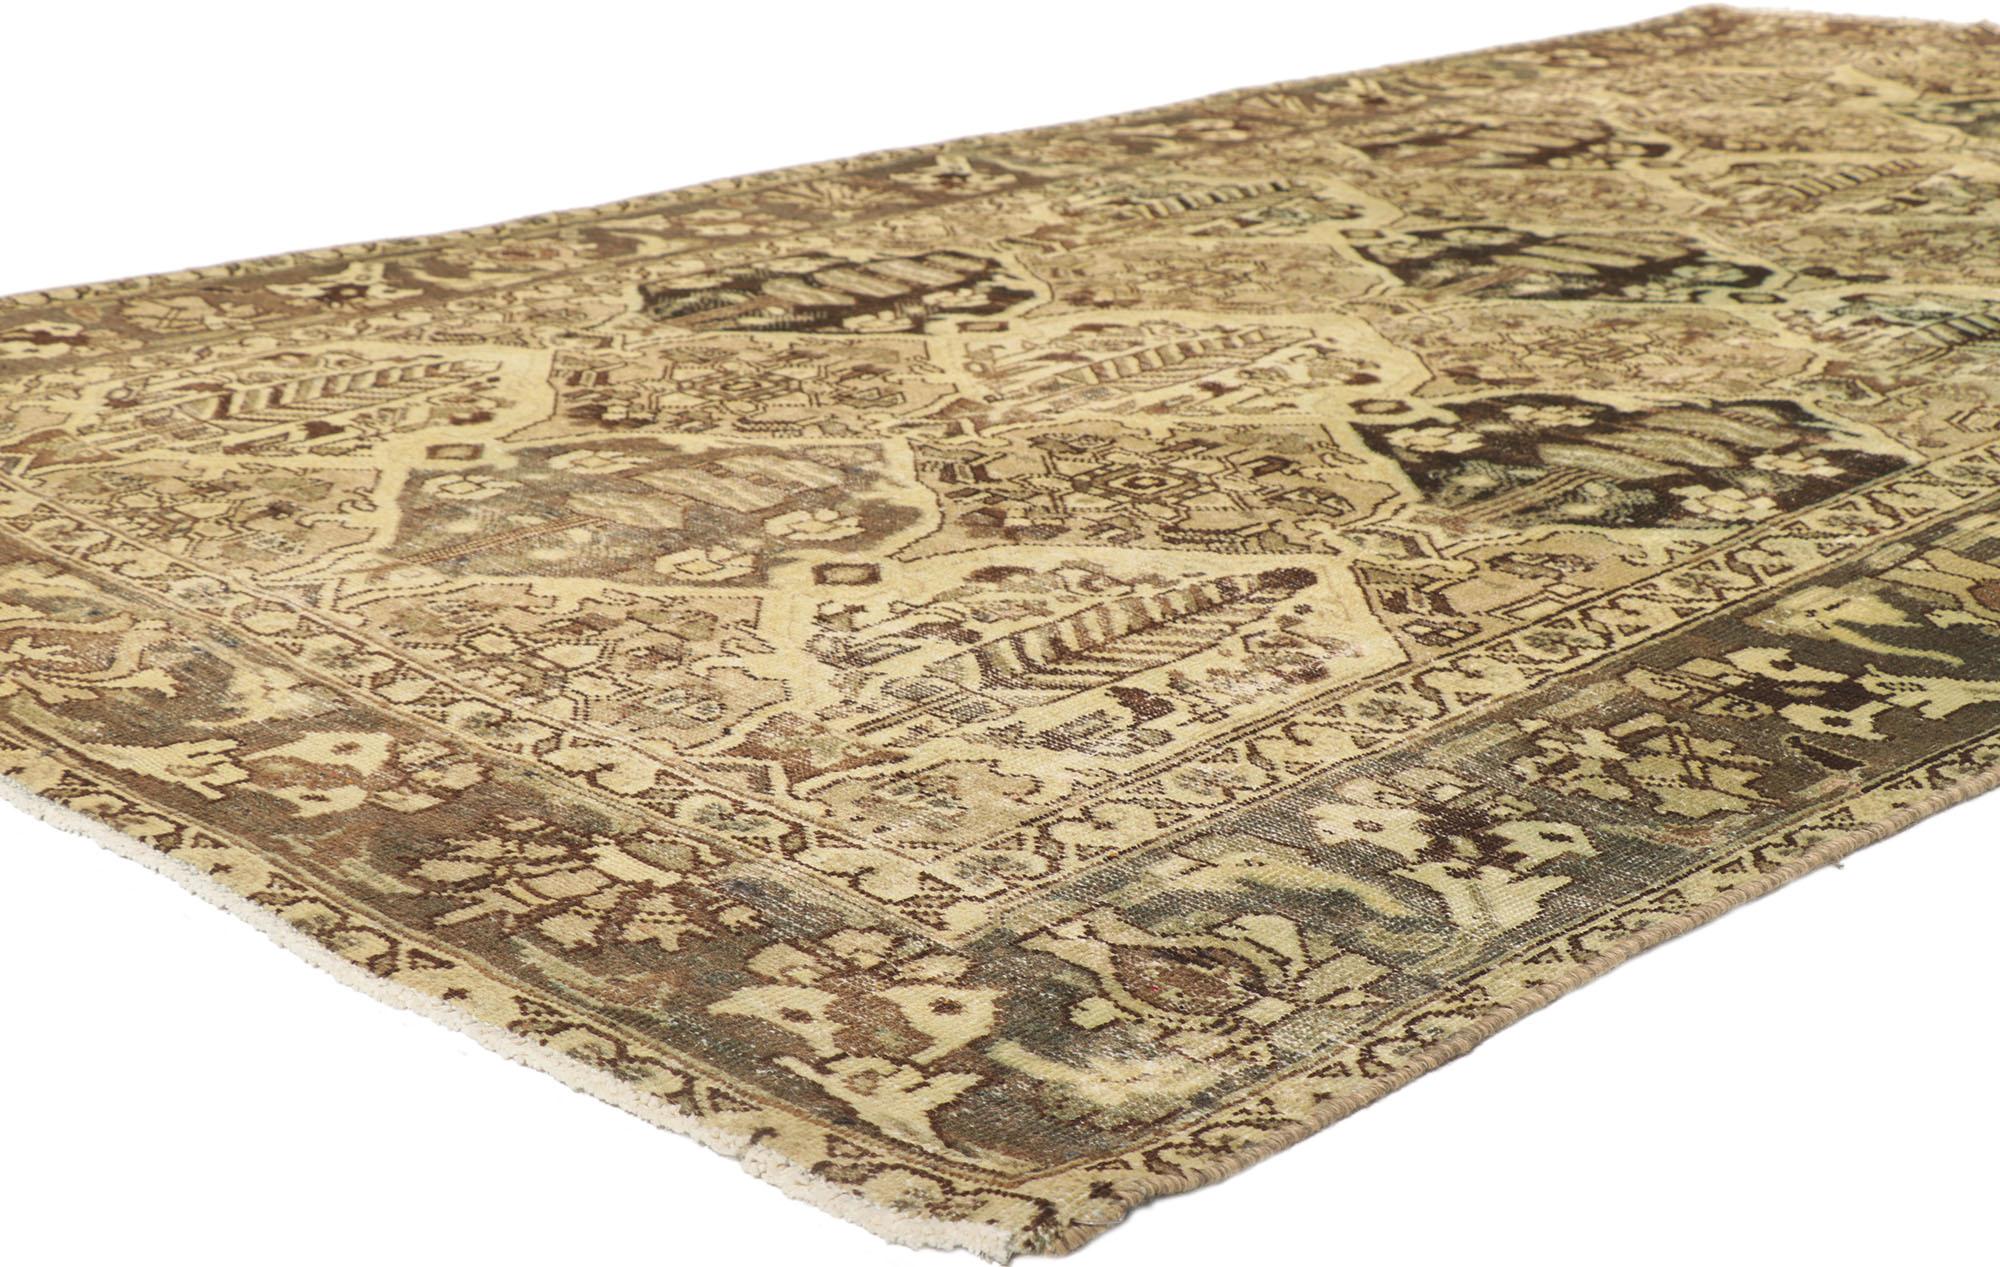 53751 Distressed Vintage Persian Bakhtiari rug with Garden Design 06'00 x 10'10. With its rustic sensibility and timeless botanical pattern, this hand-knotted wool distressed antique Persian Bakhtiari rug will take on a curated lived-in look that